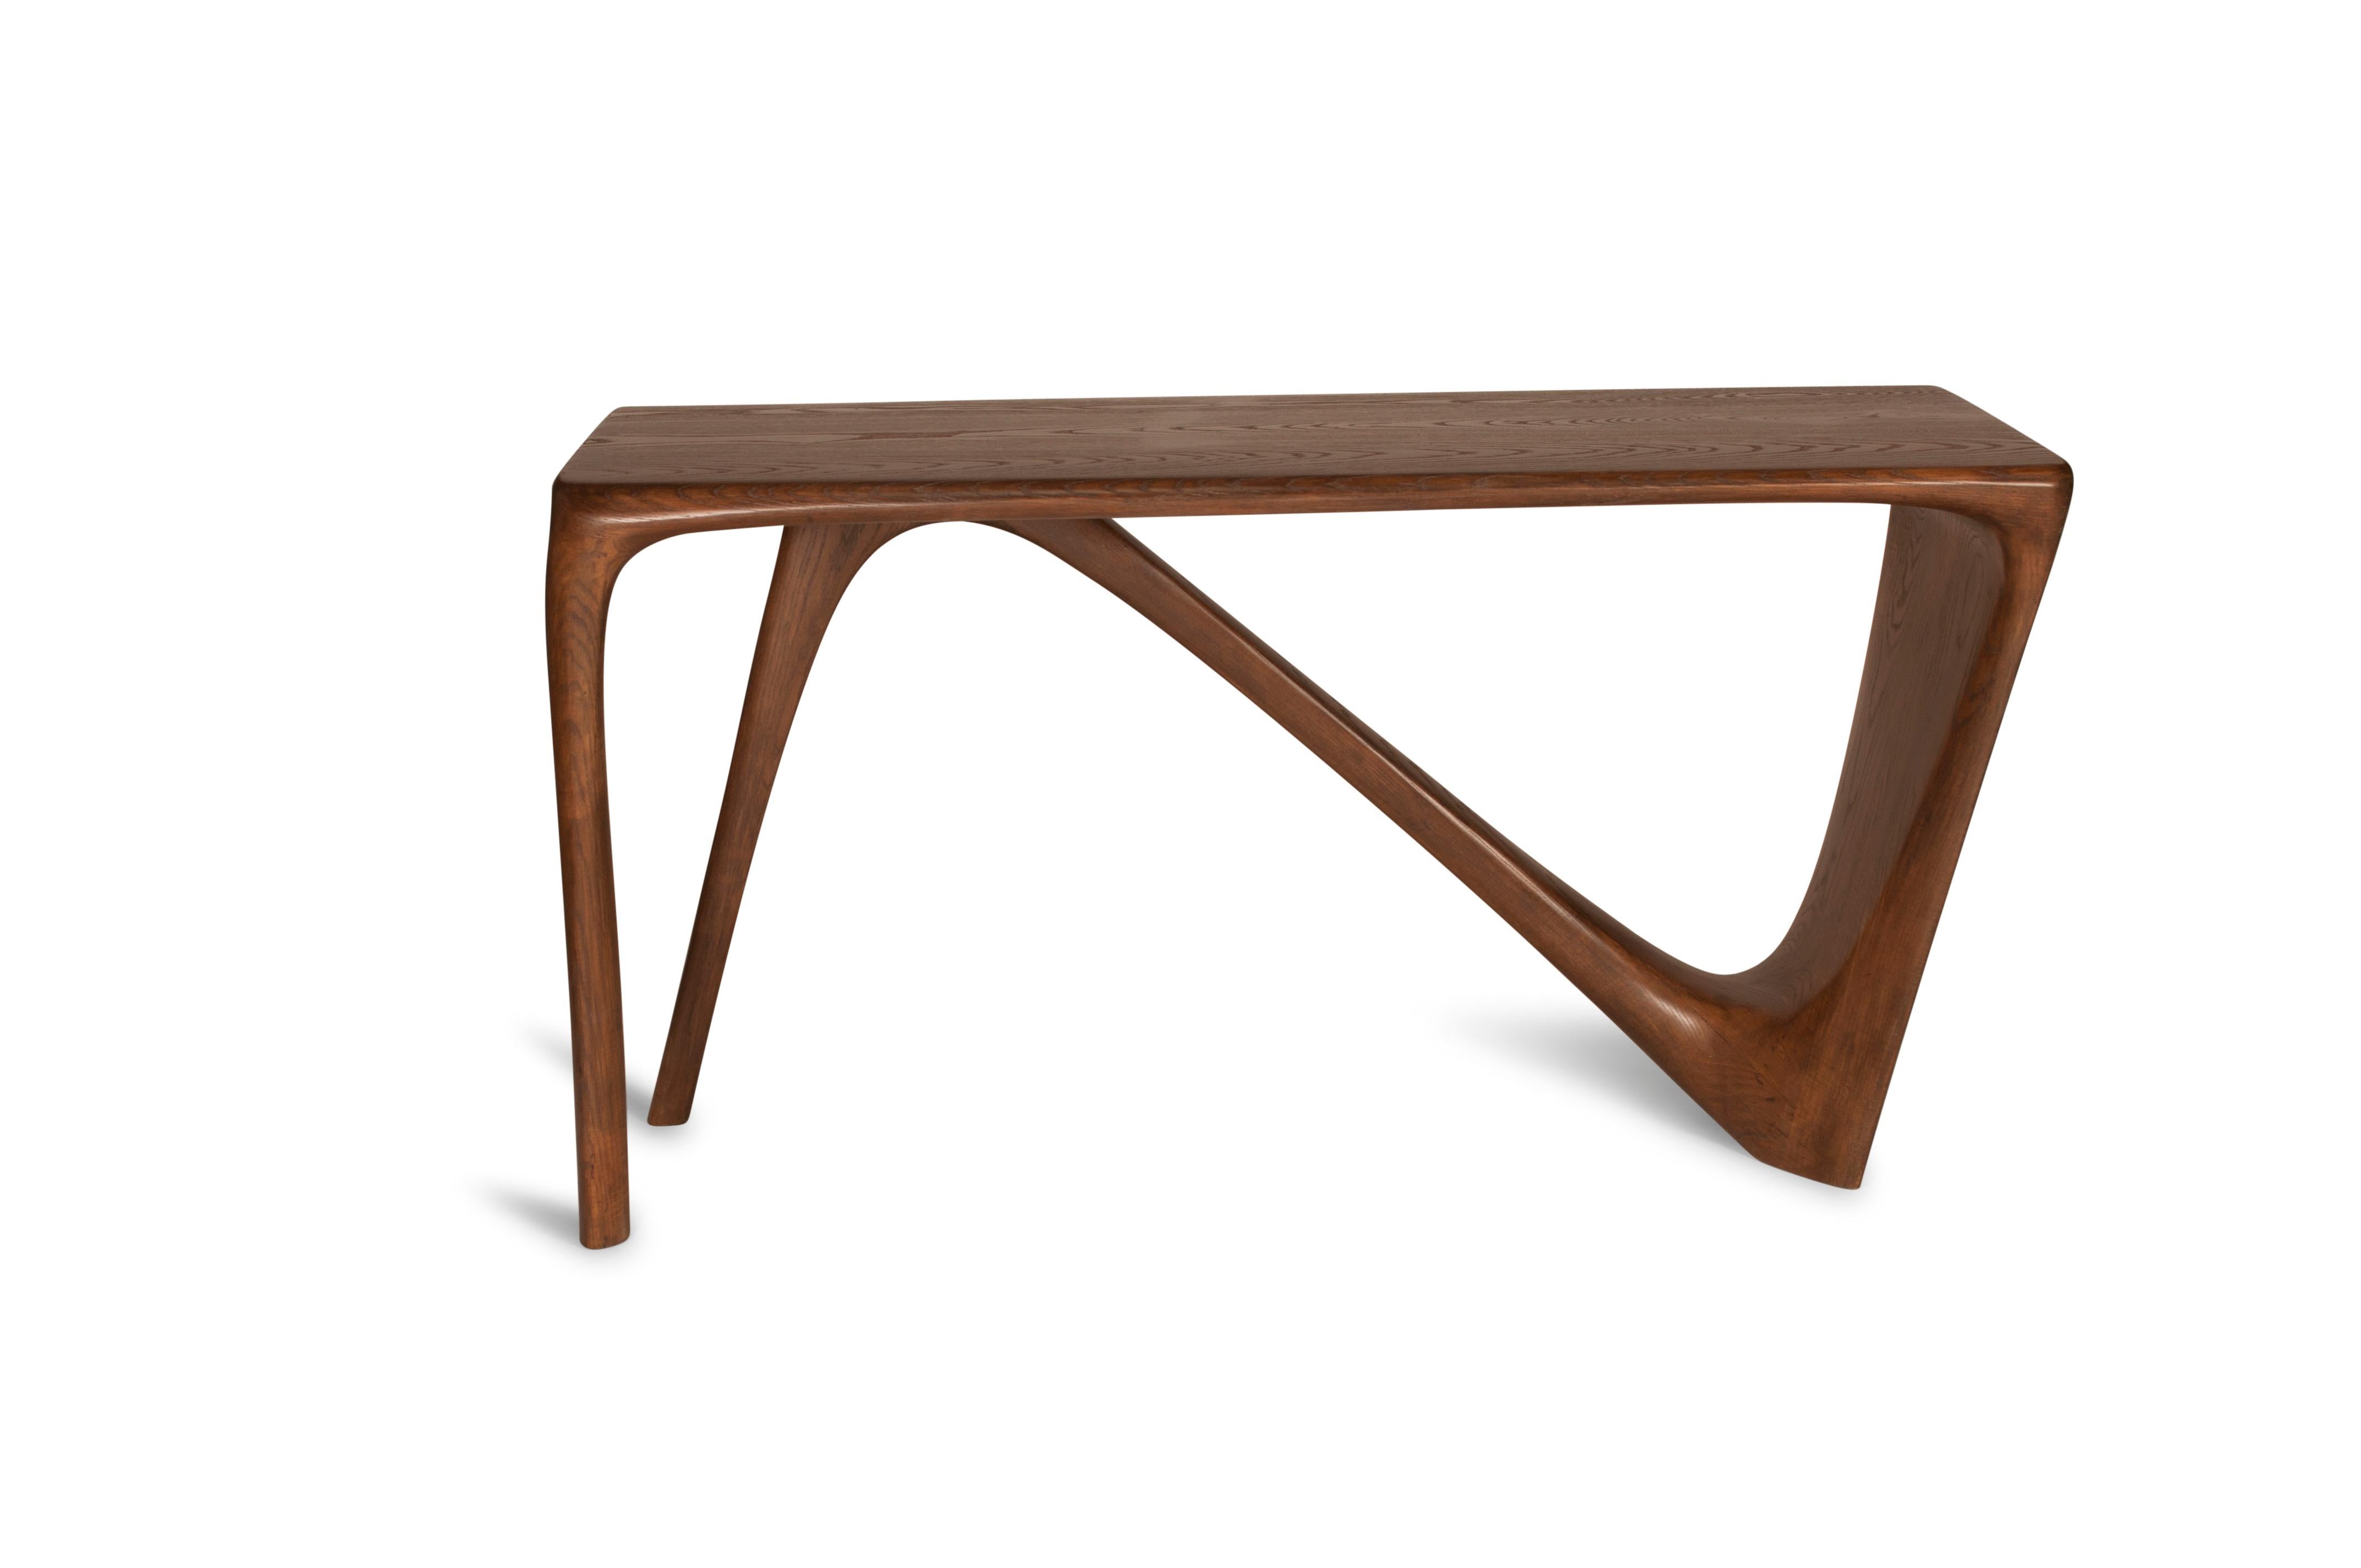 American Amorph Astra modern Desk in Graphite Walnut Stain on Ash wood  For Sale